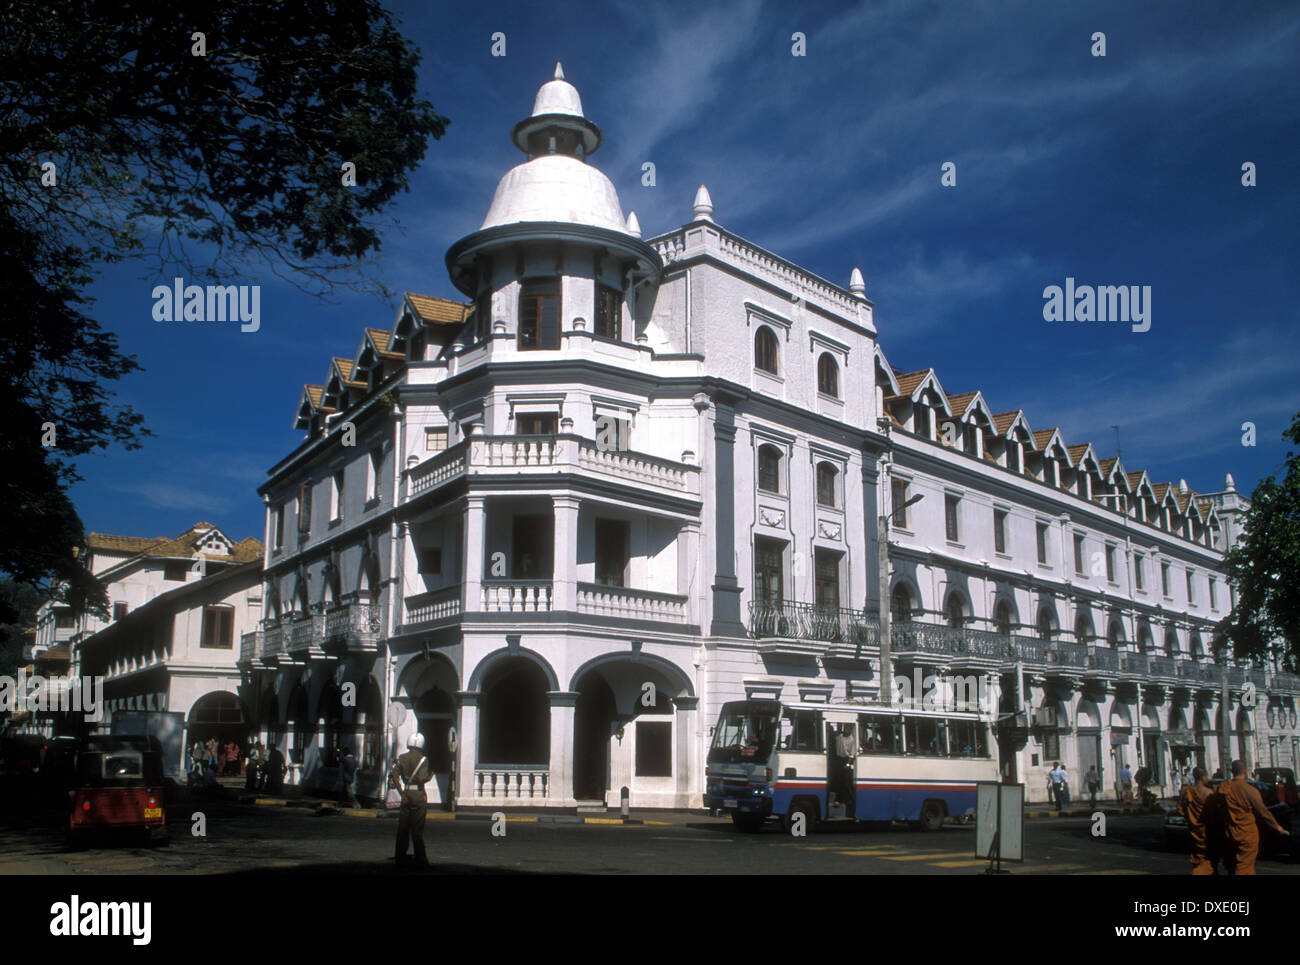 Exterior of the 165 year old Queen's Hotel in Kandy, Sri Lanka Stock Photo